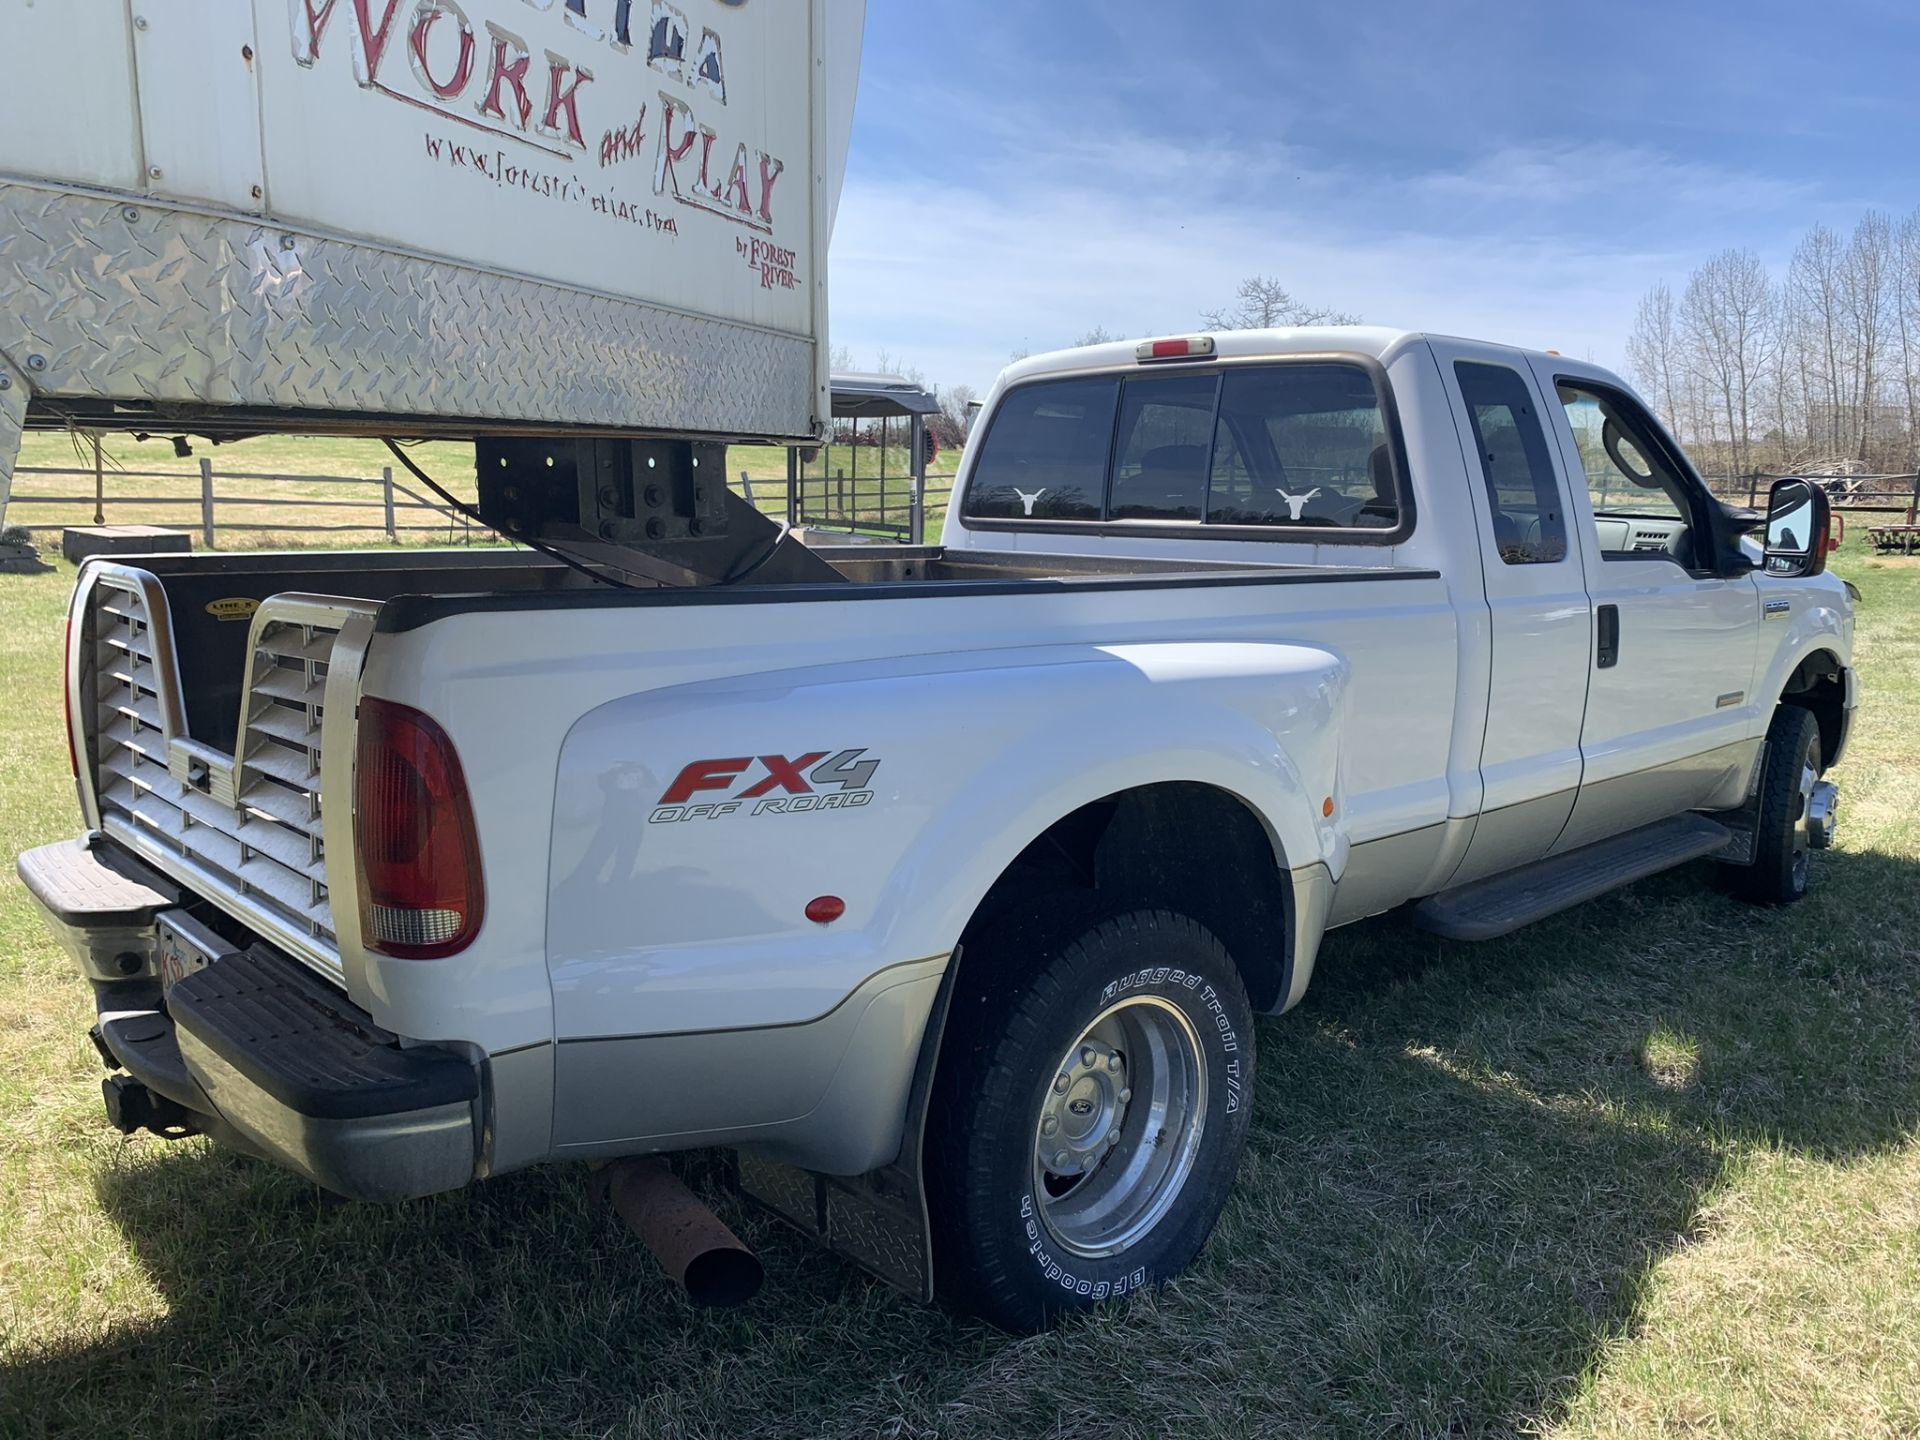 2005 F350 LARIAT SUPER DUTY SUPER CAB-4 DR. 4X4 DUALLY LONG BOX TRUCK W/6L DIESEL ENG., 134,810 - Image 3 of 14